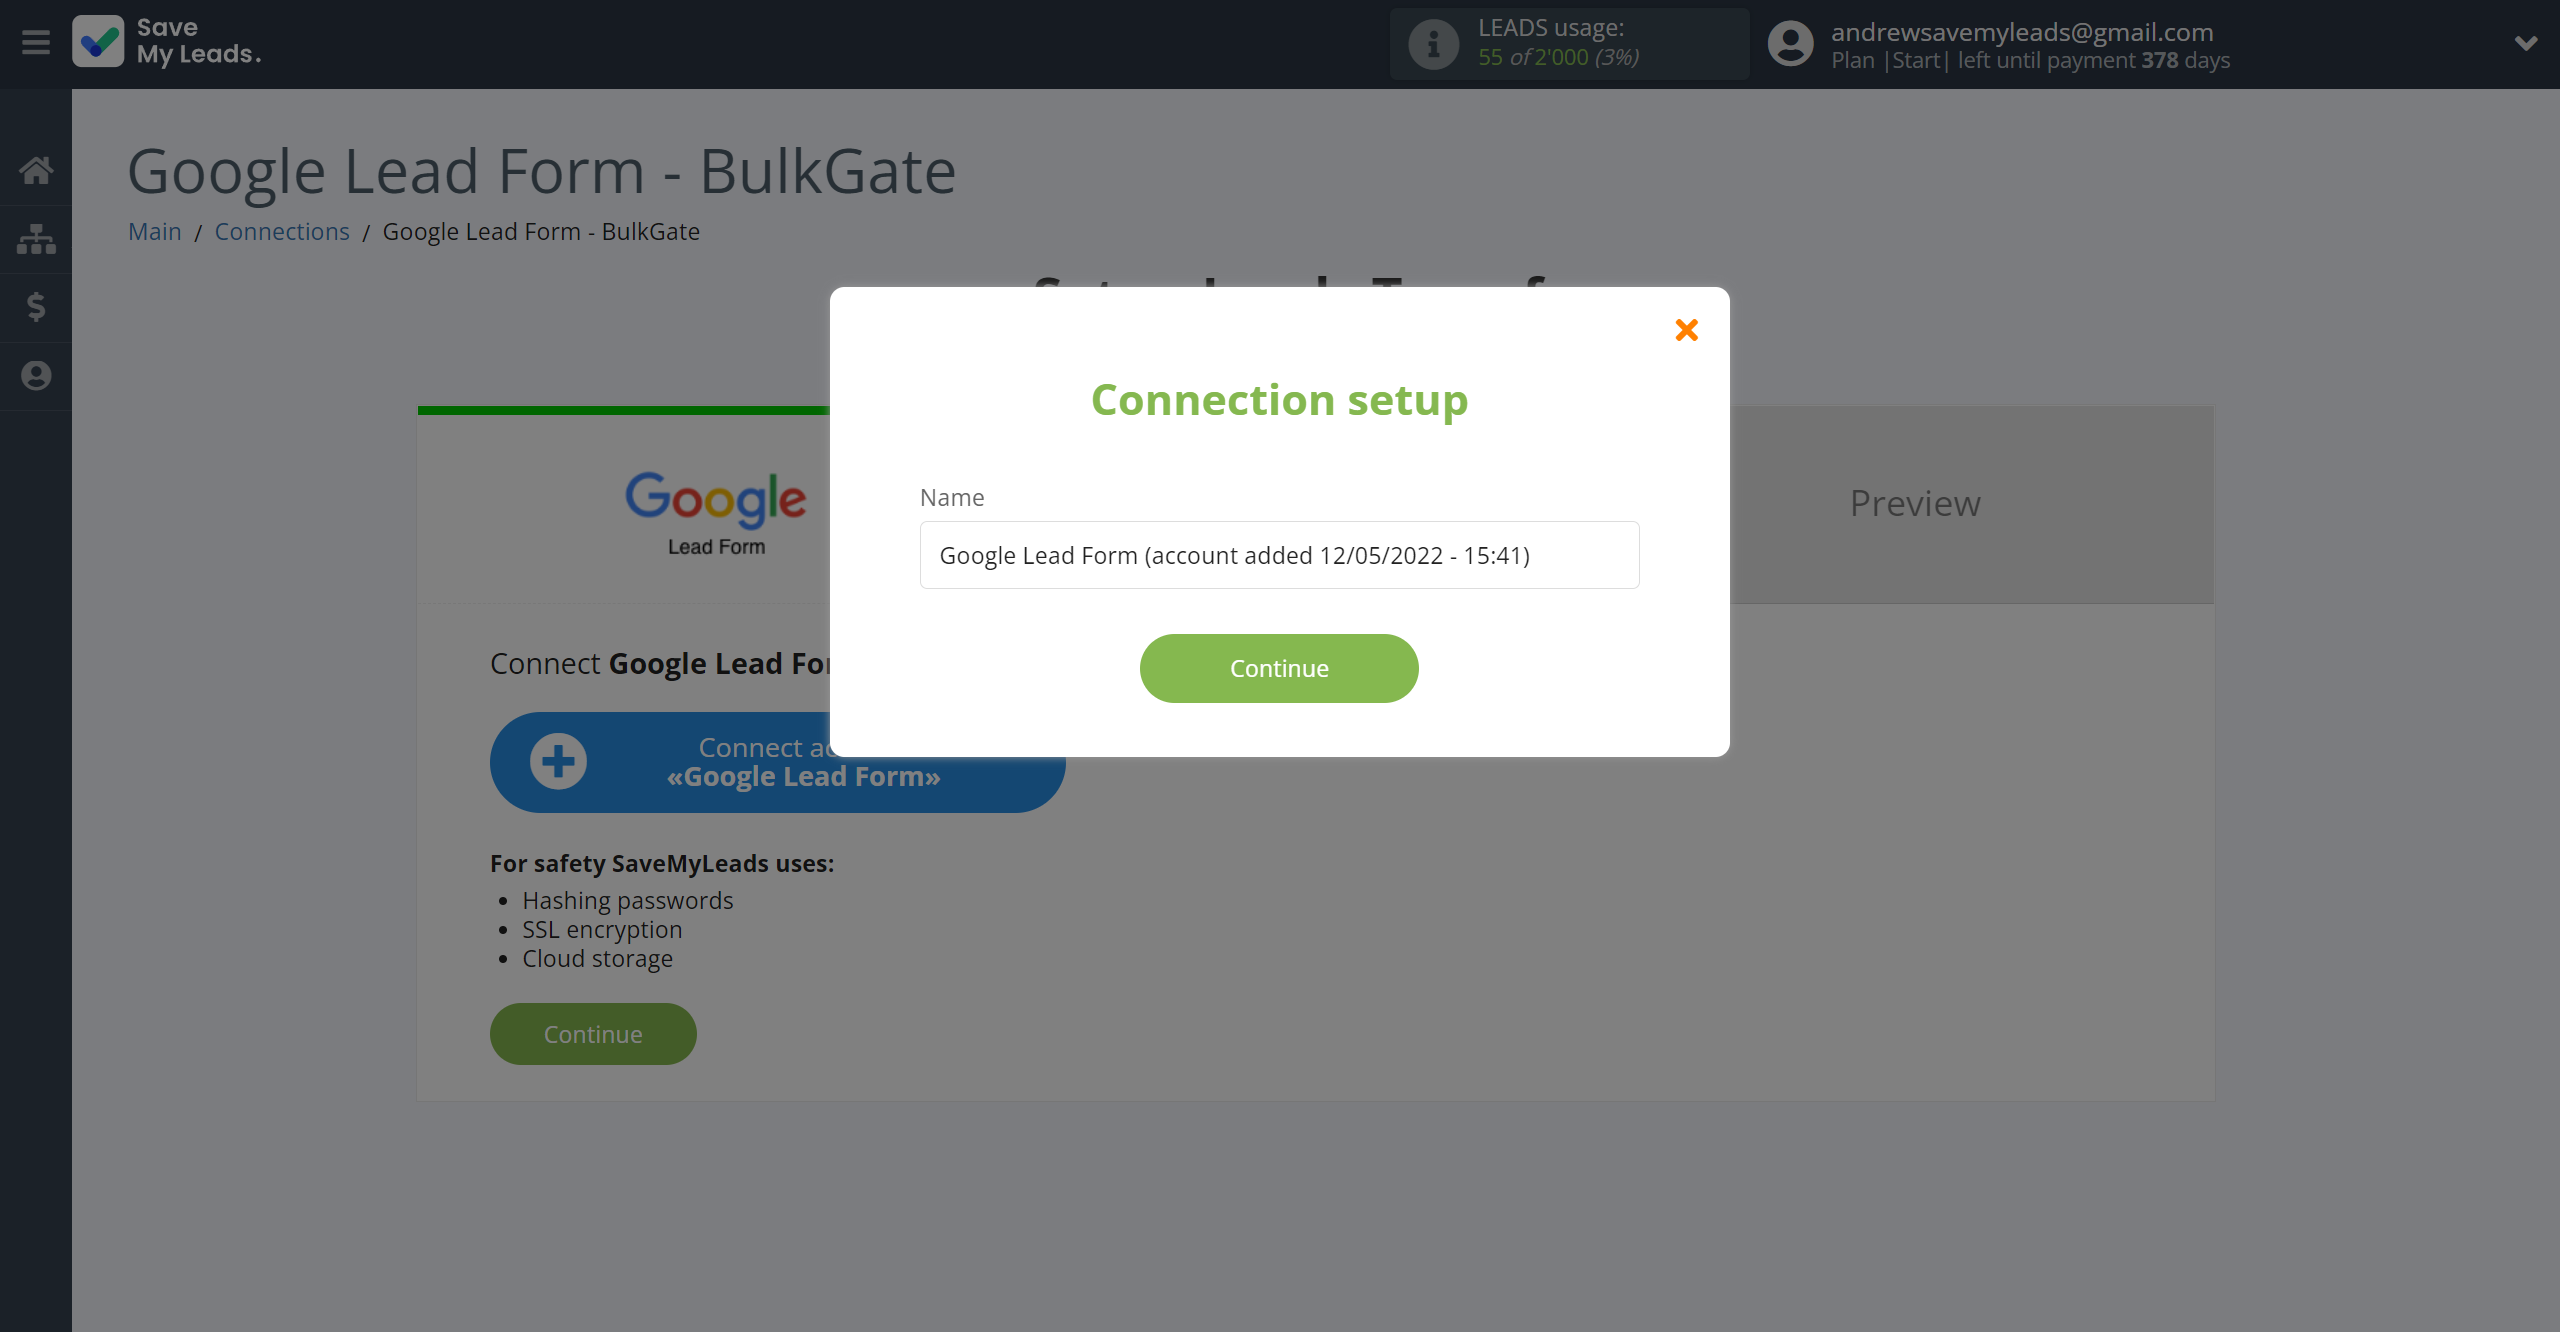 How to Connect Google Lead Form with BulkGate | Data Source account connection